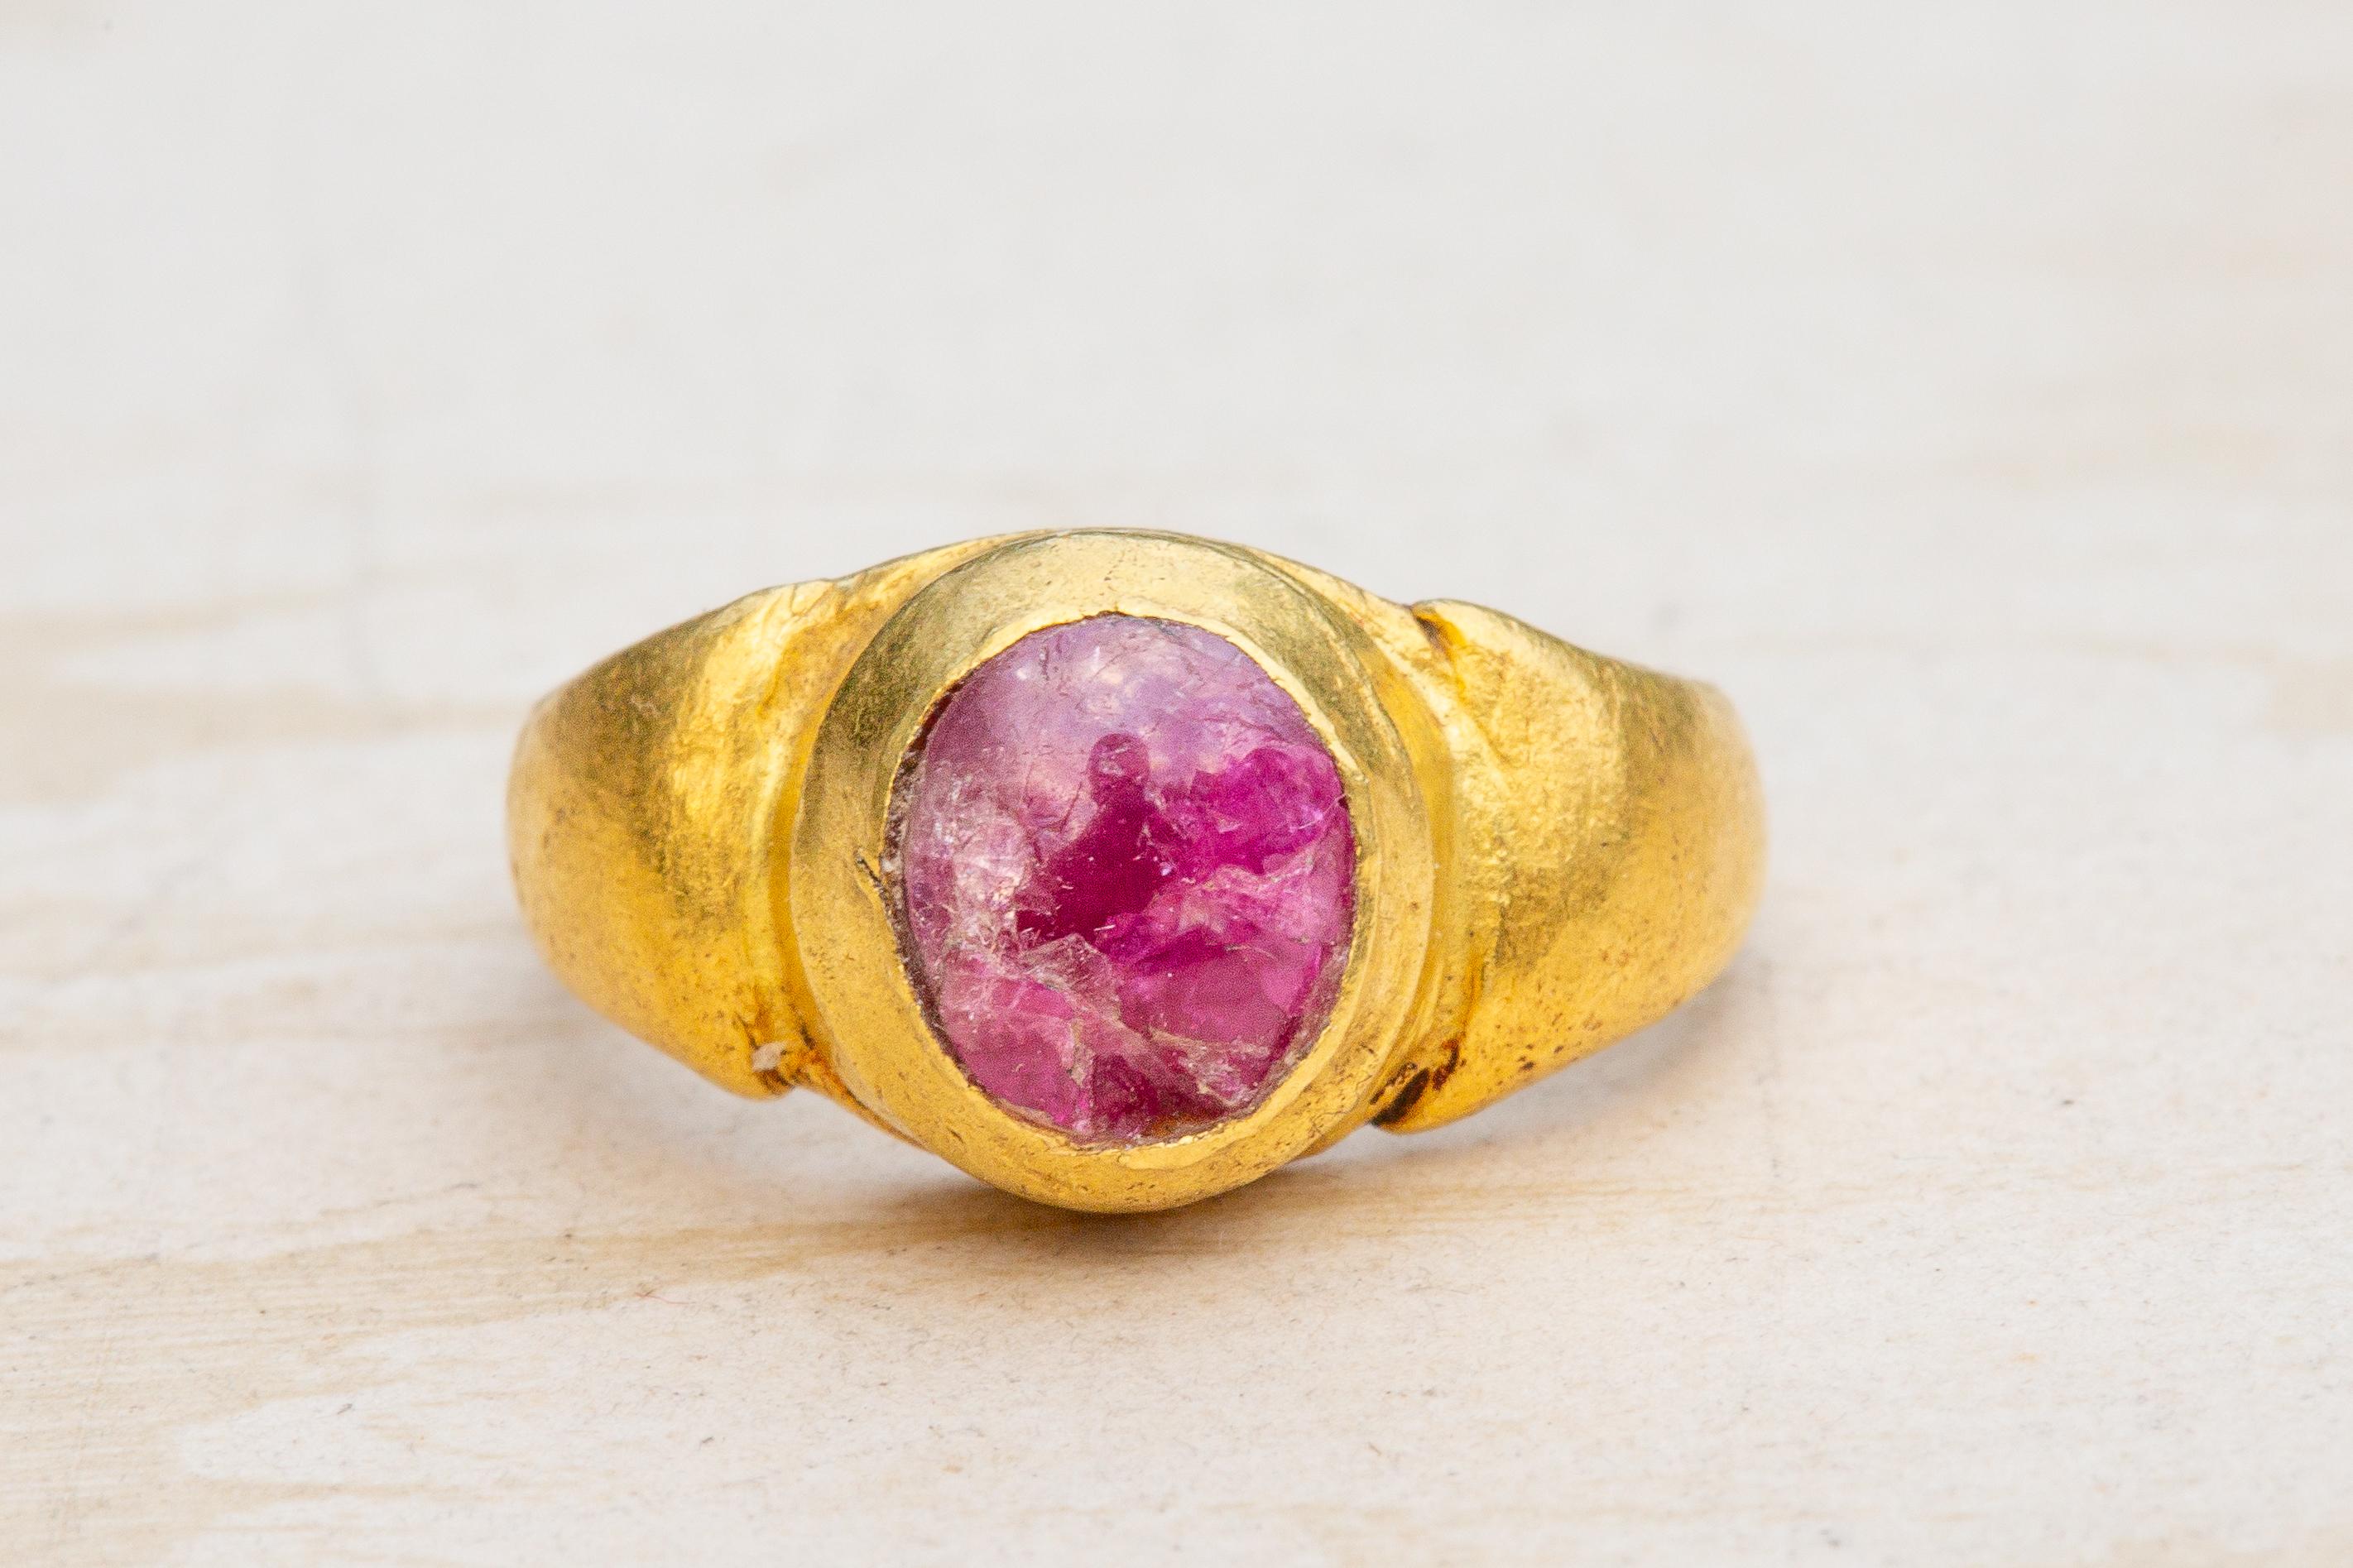 A scarce early Javanese gold and ruby ring dating from the 7th-15th century Indonesian Classical period. 

As expected with Javanese gem-set gold rings made in this period, the present ring is crafted high-karat gold and set with a polished